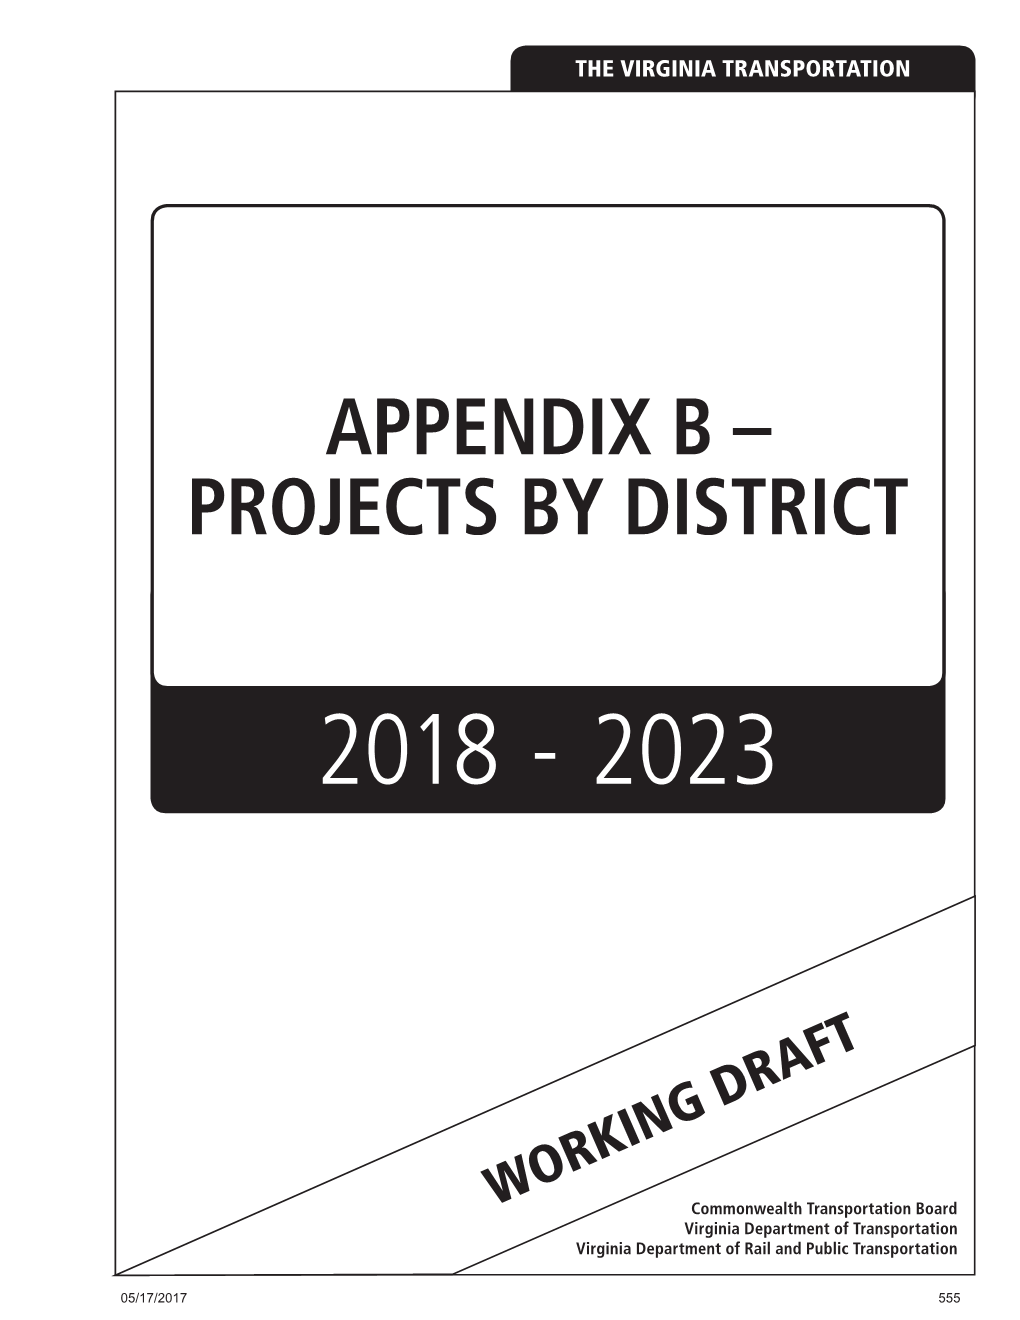 Appendix B – Projects by District